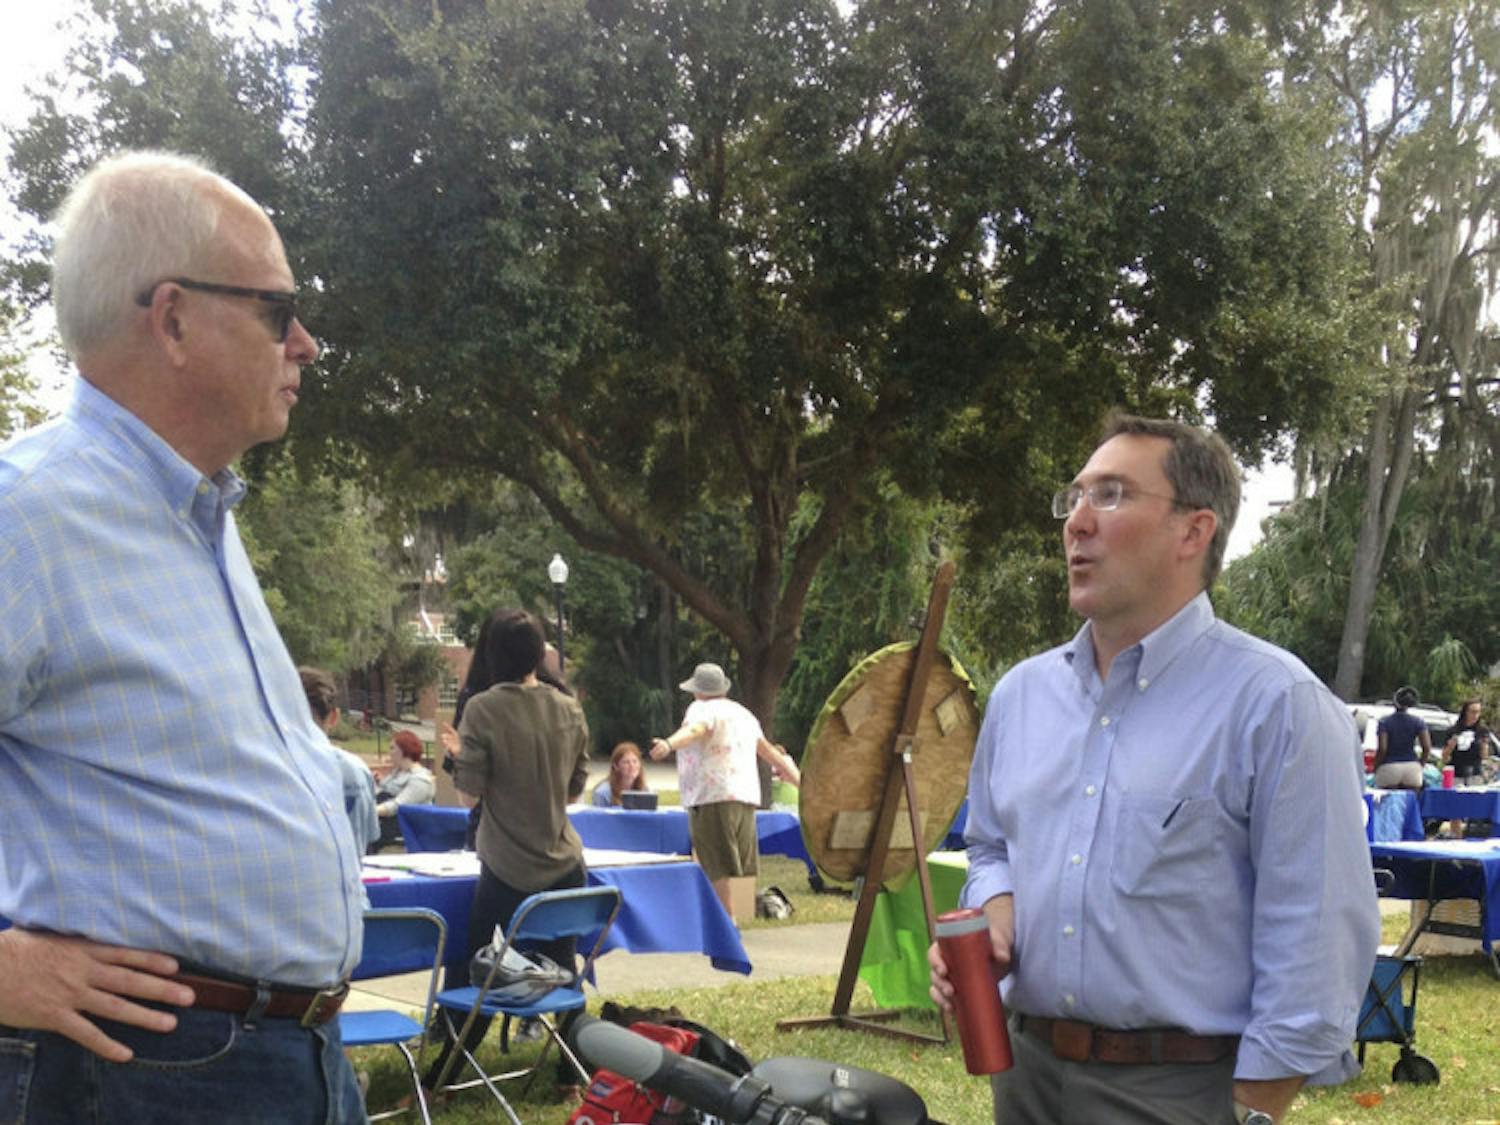 Former UF President Bernie Machen (left) converses with Matthew Williams, UF Office of Sustainability &amp; Energy Integration director, about his electric bike at the Sustainable Transportation Fair on the Reitz Union Lawn on Oct. 21, 2015. Williams said e-biking is "the fastest, easiest and most pleasant way to get around campus."